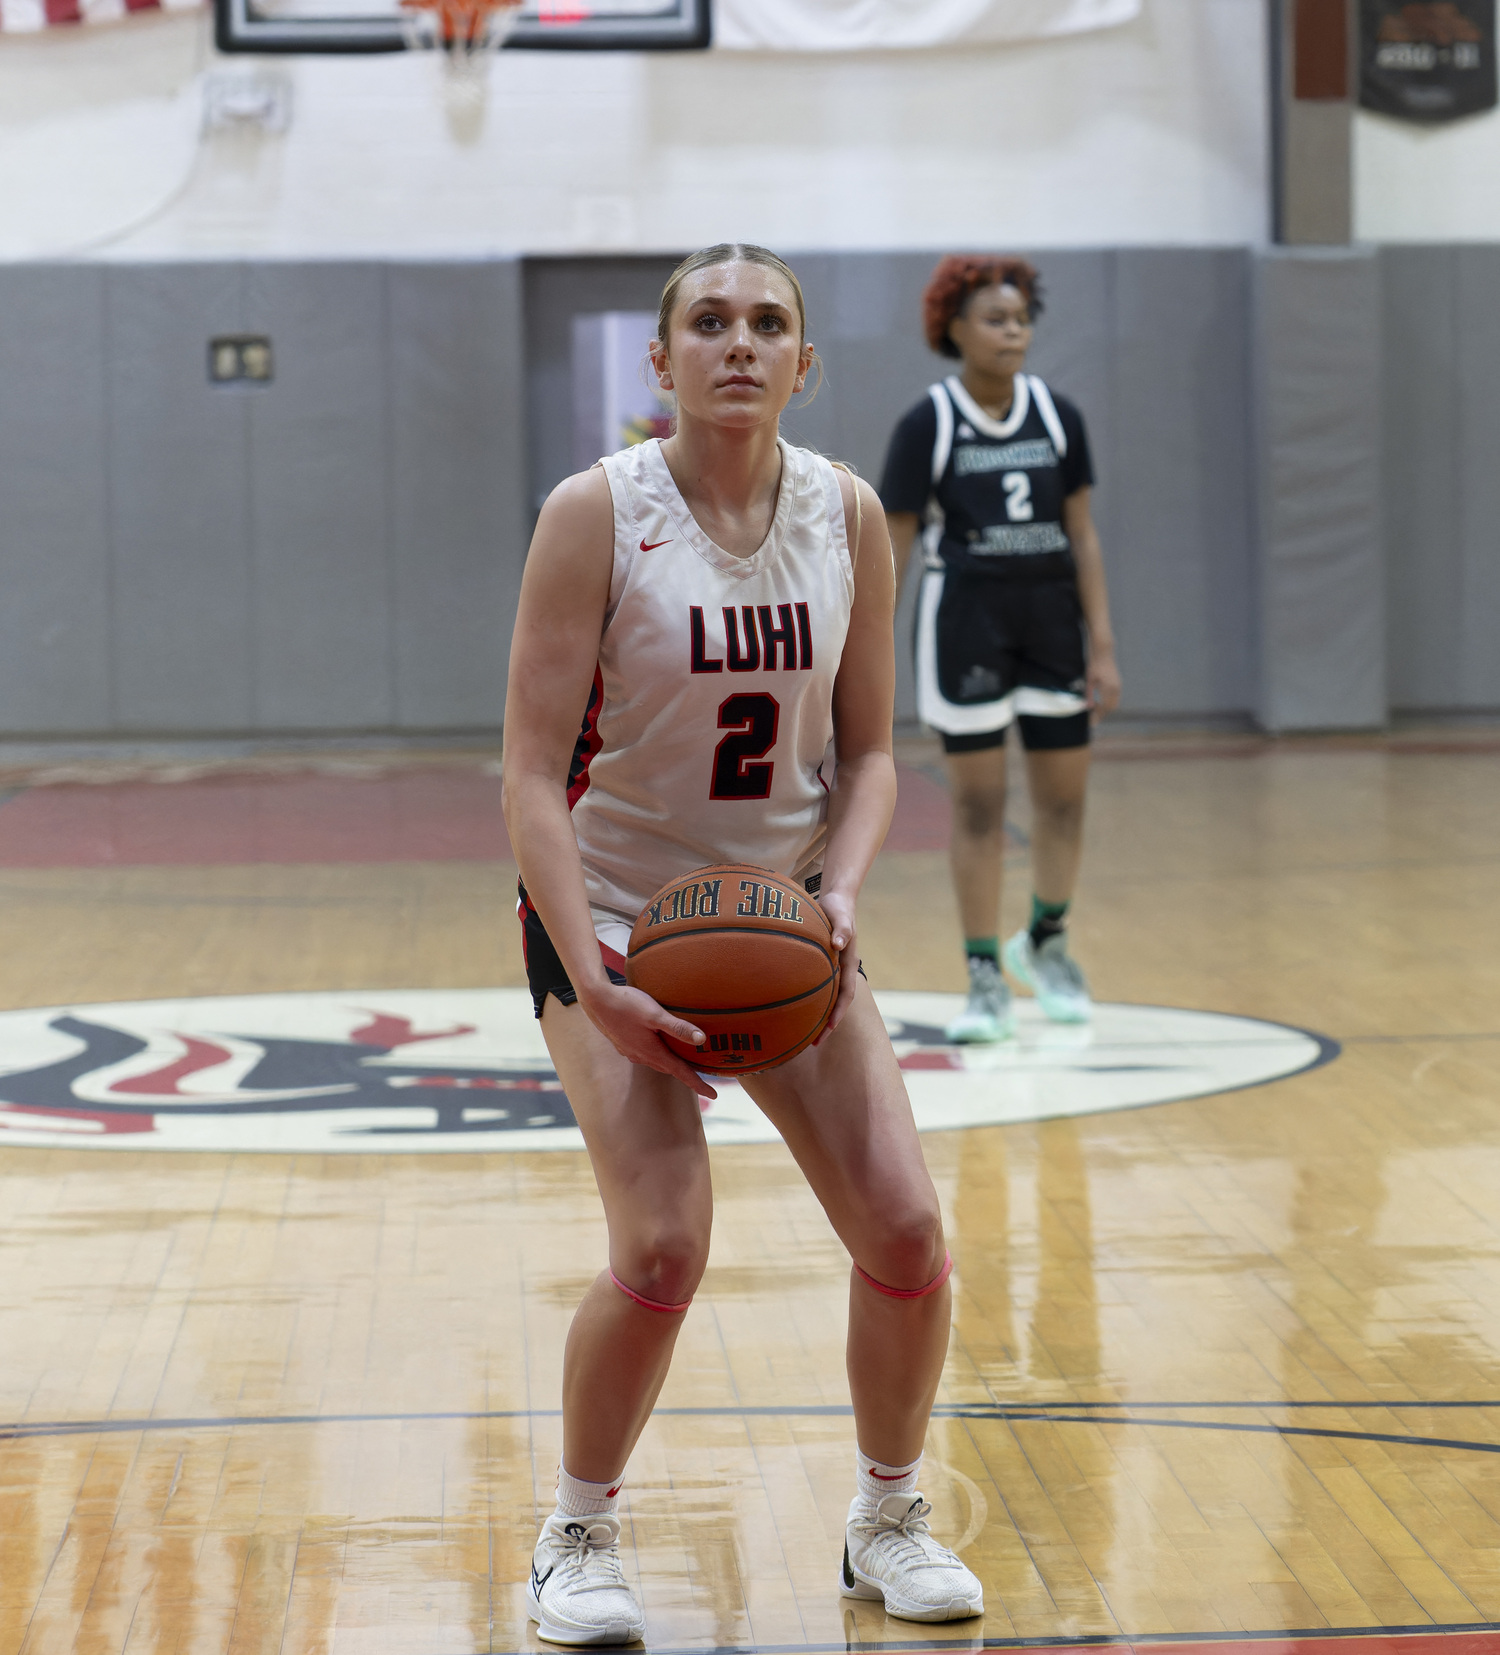 Sag Harbor resident Coco Lohmiller in action with the LuHi girls basketball team, which has been the top-ranked team in the nation for most of the season. M. FIDEL PHOTOGRAPHY